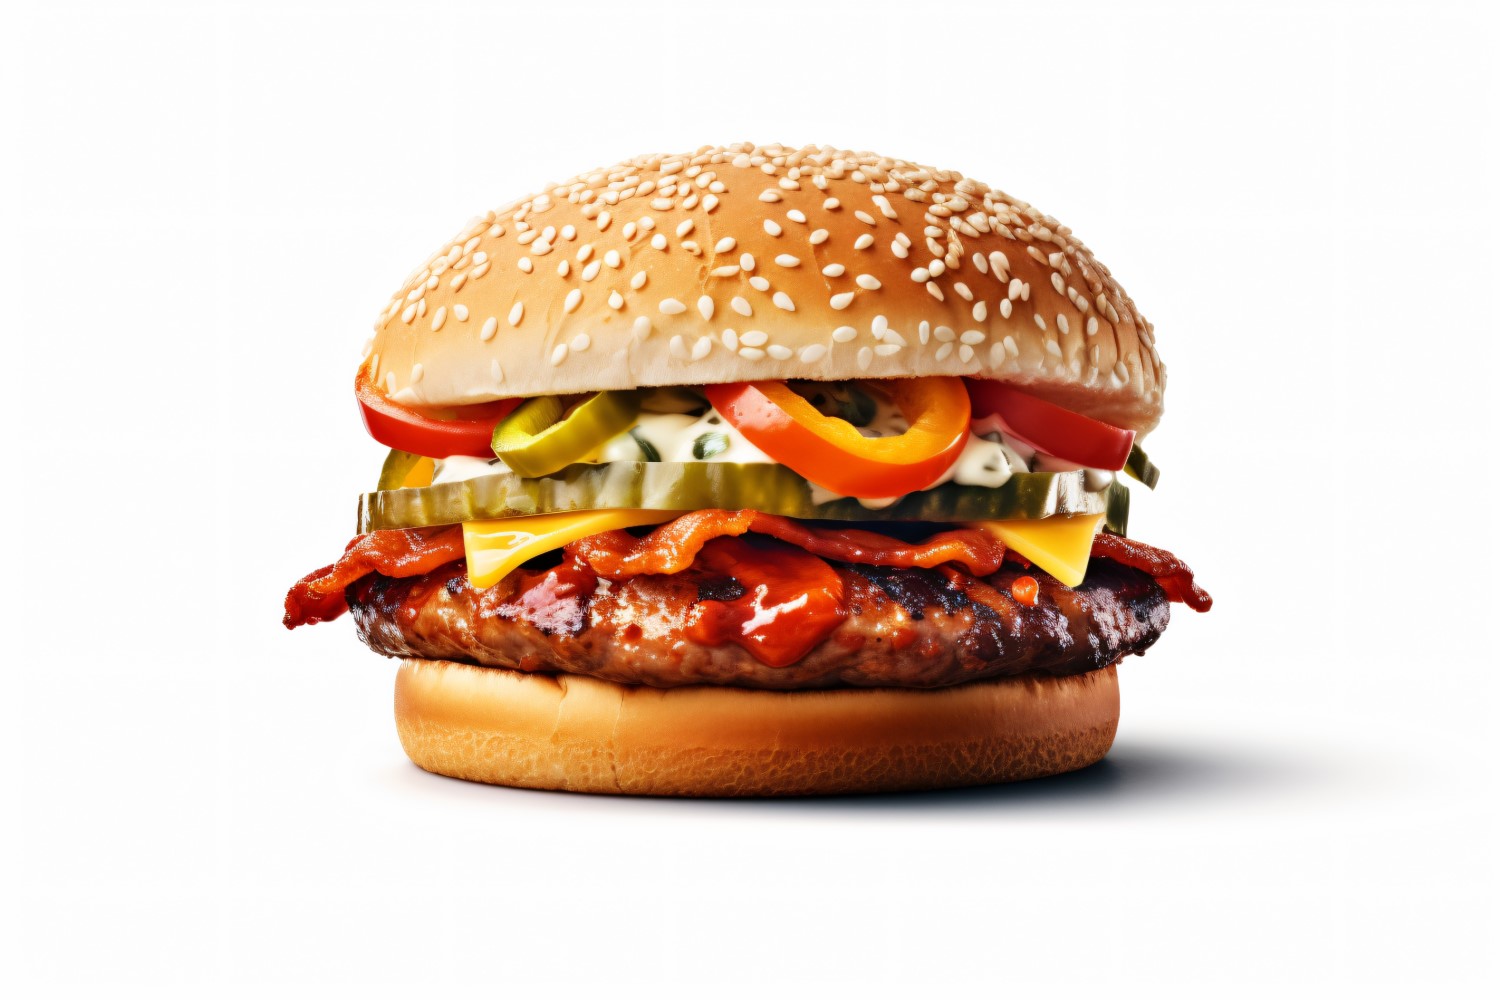 Bacon burger with beef patty, on white background 61